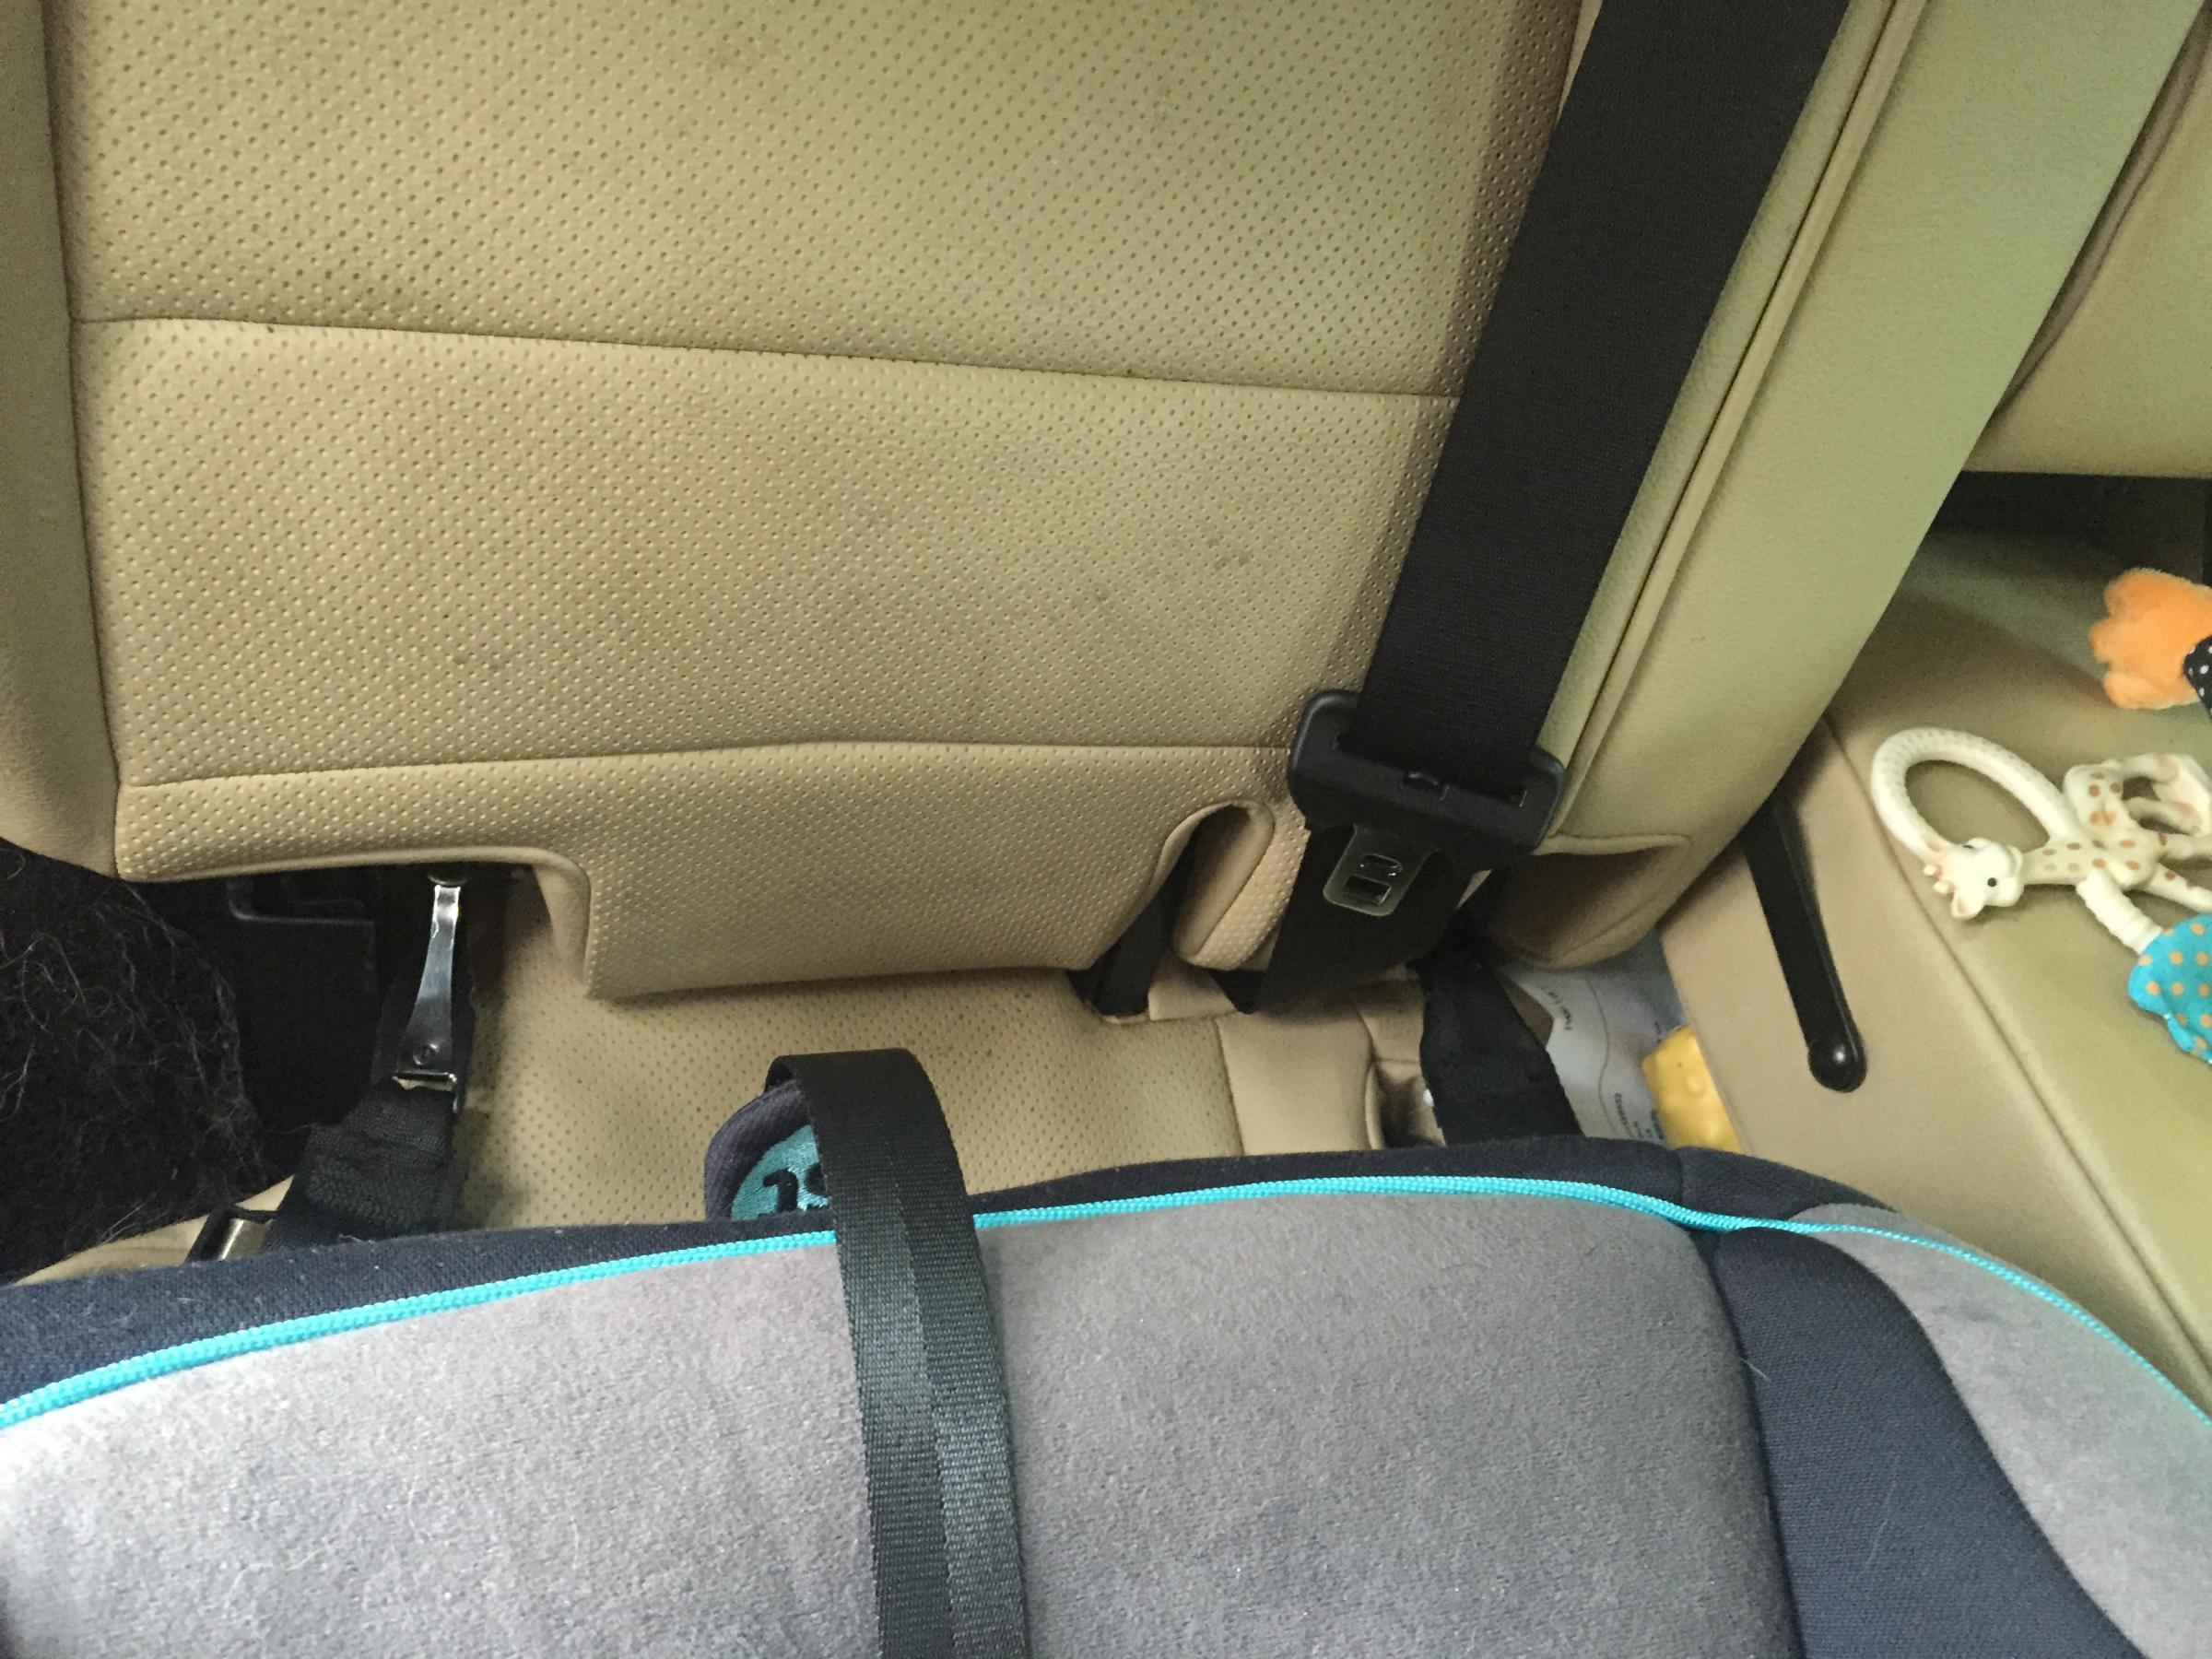 Baby car seat installation - Land Rover Forums - Land Rover Enthusiast ...